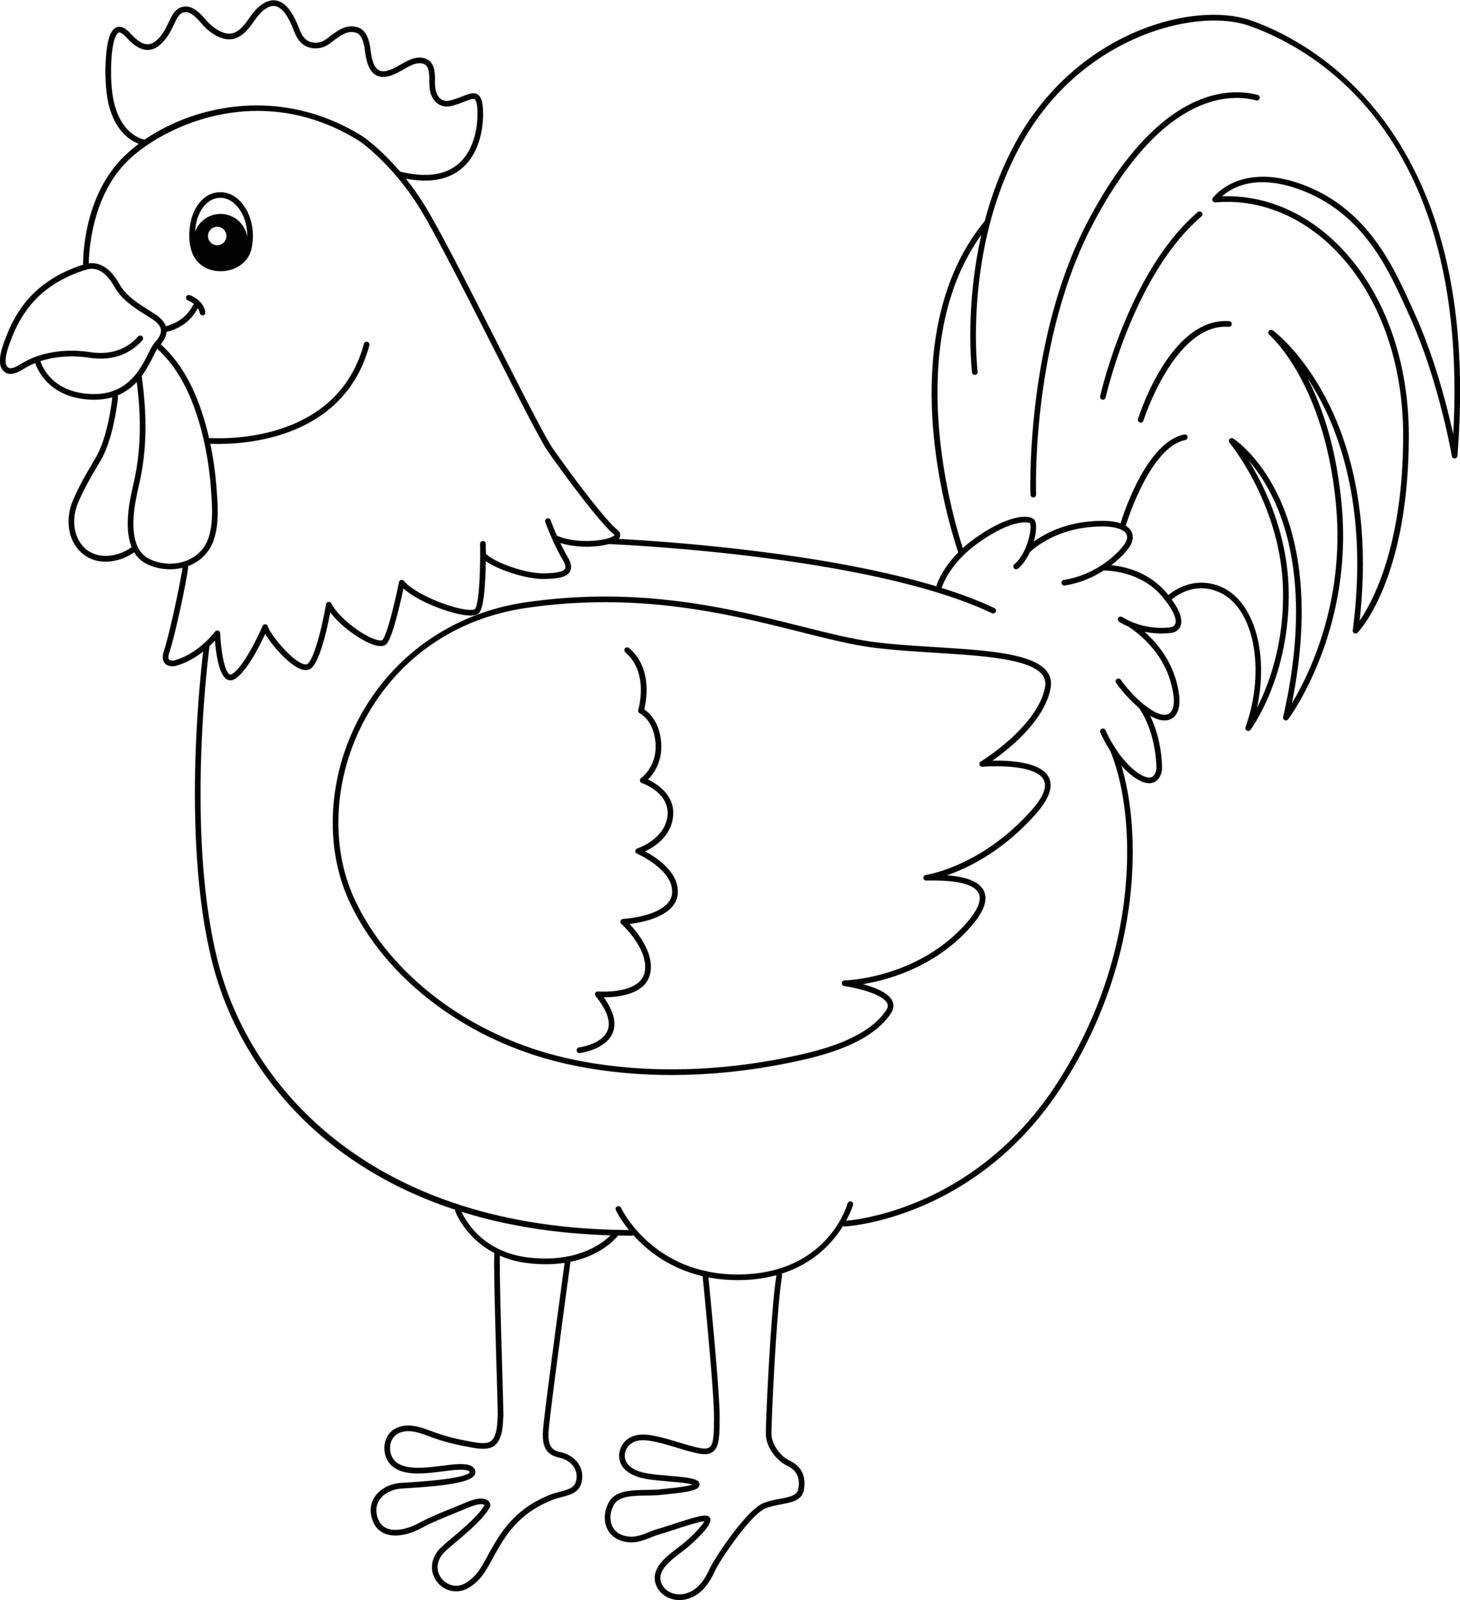 Rooster Coloring Page Isolated for Kids by abbydesign